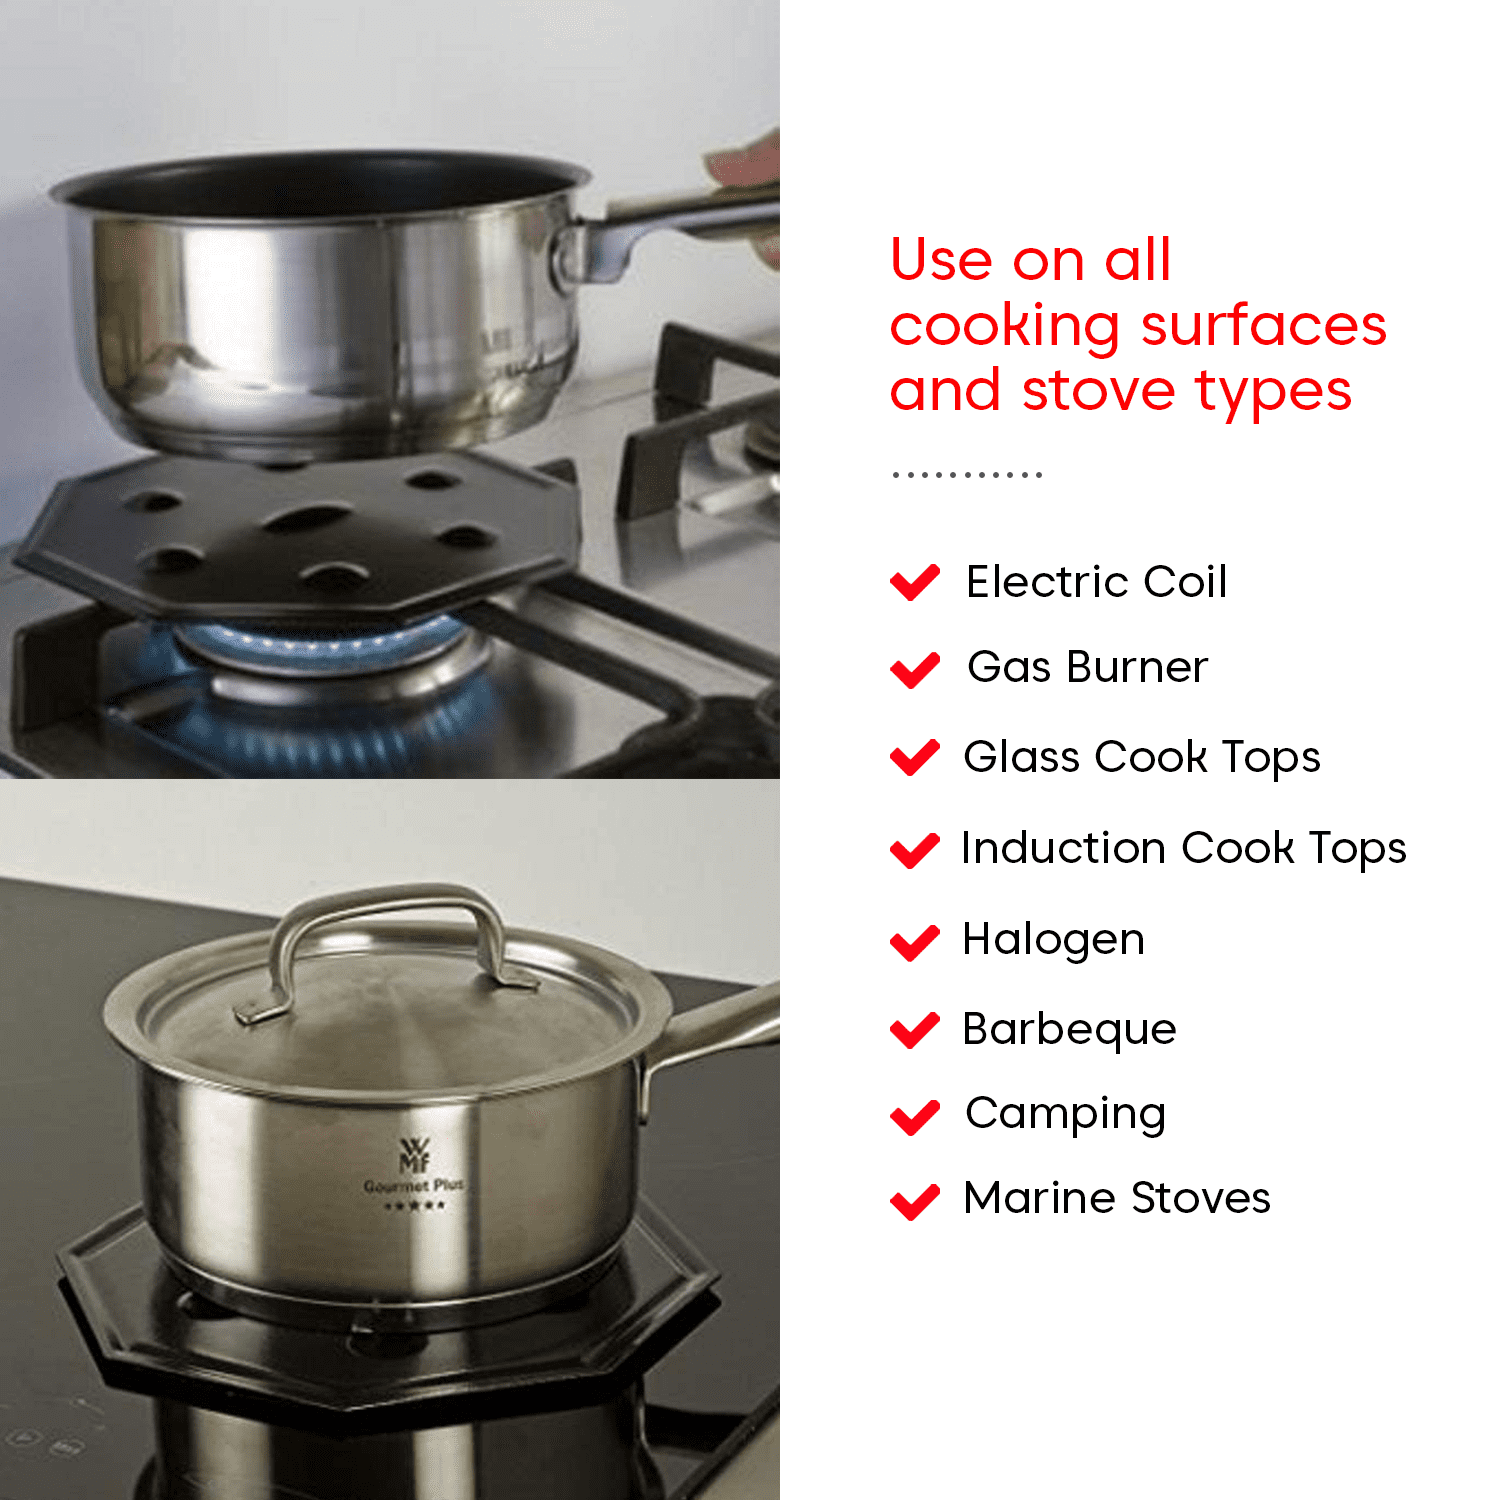 Stainless Steel Delaman Heat Diffuser Gas Stove Size : 9inch 8inch/9inch Gas Simmer Ring Electric Cooker Fits on Hob 